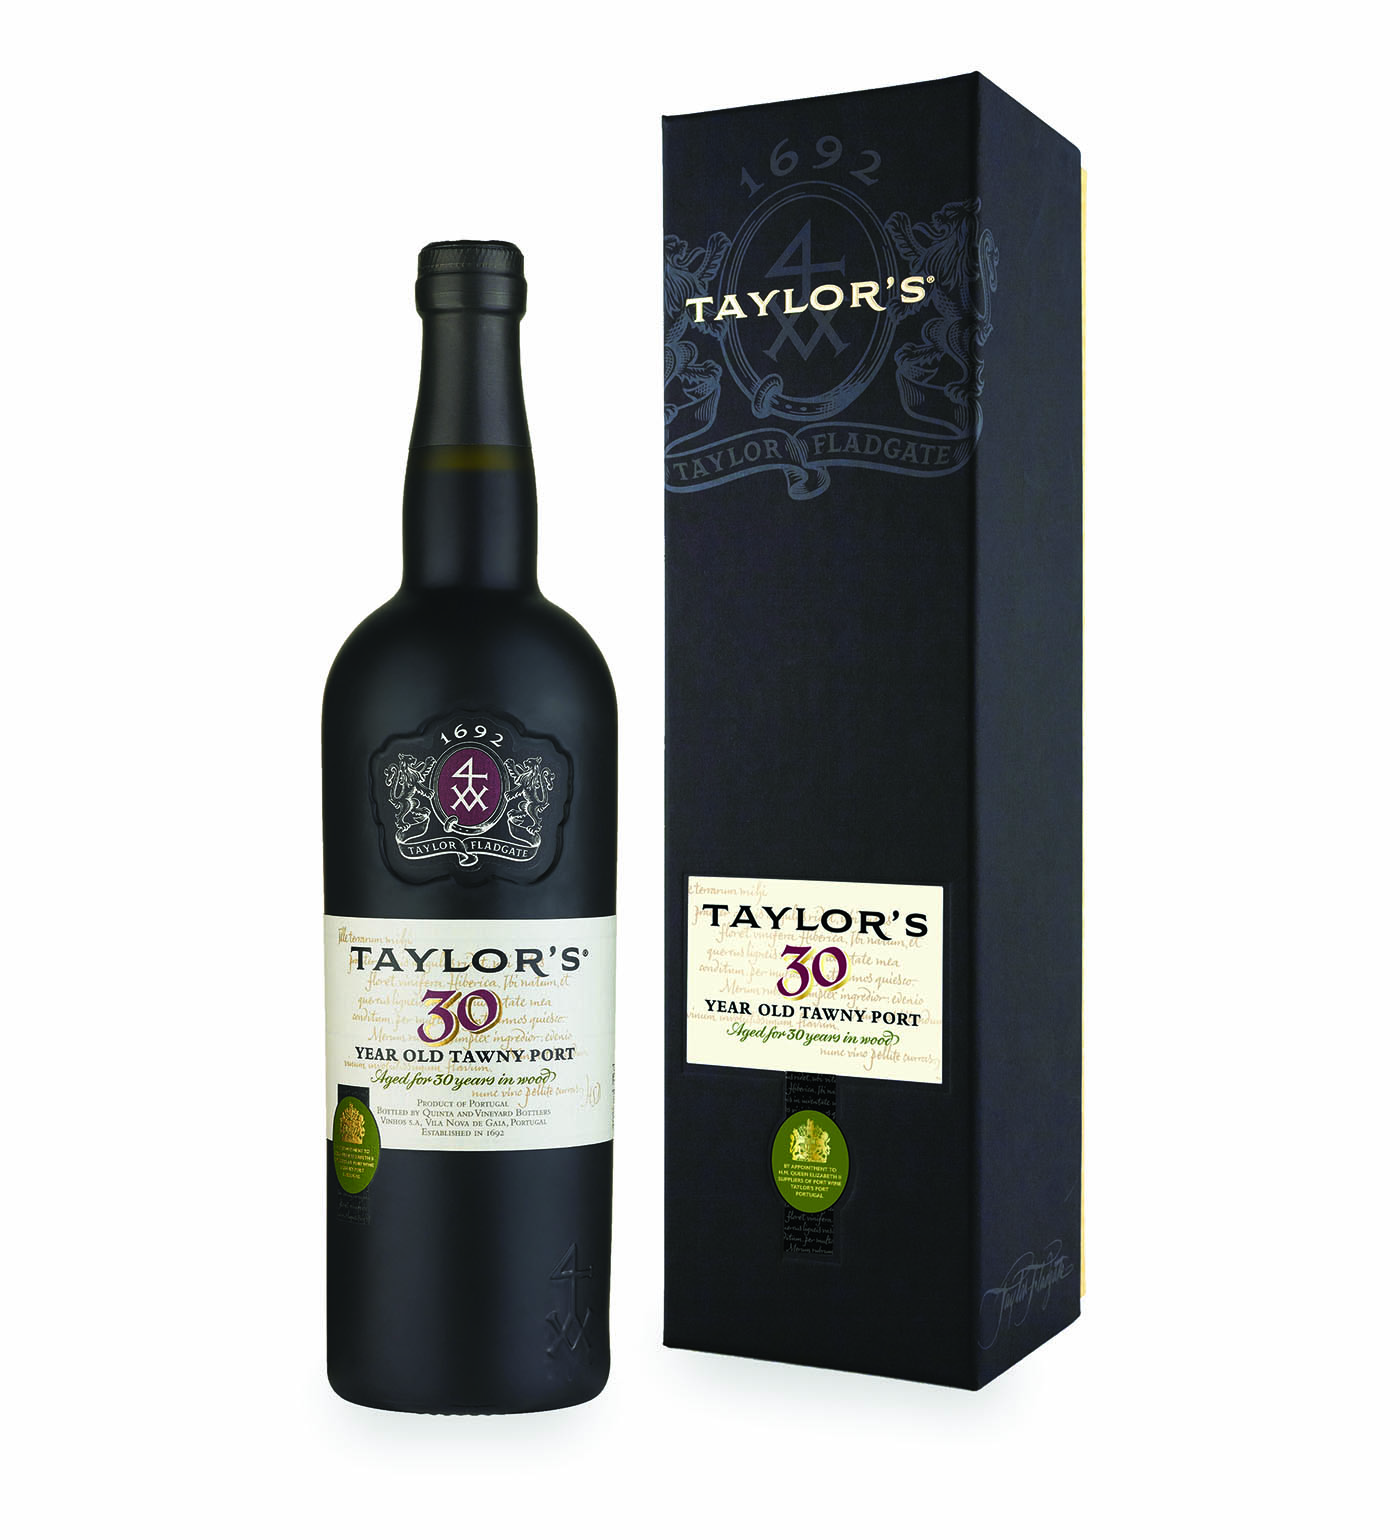 Taylor's Port 30 year old Tawny 325th Luxury box